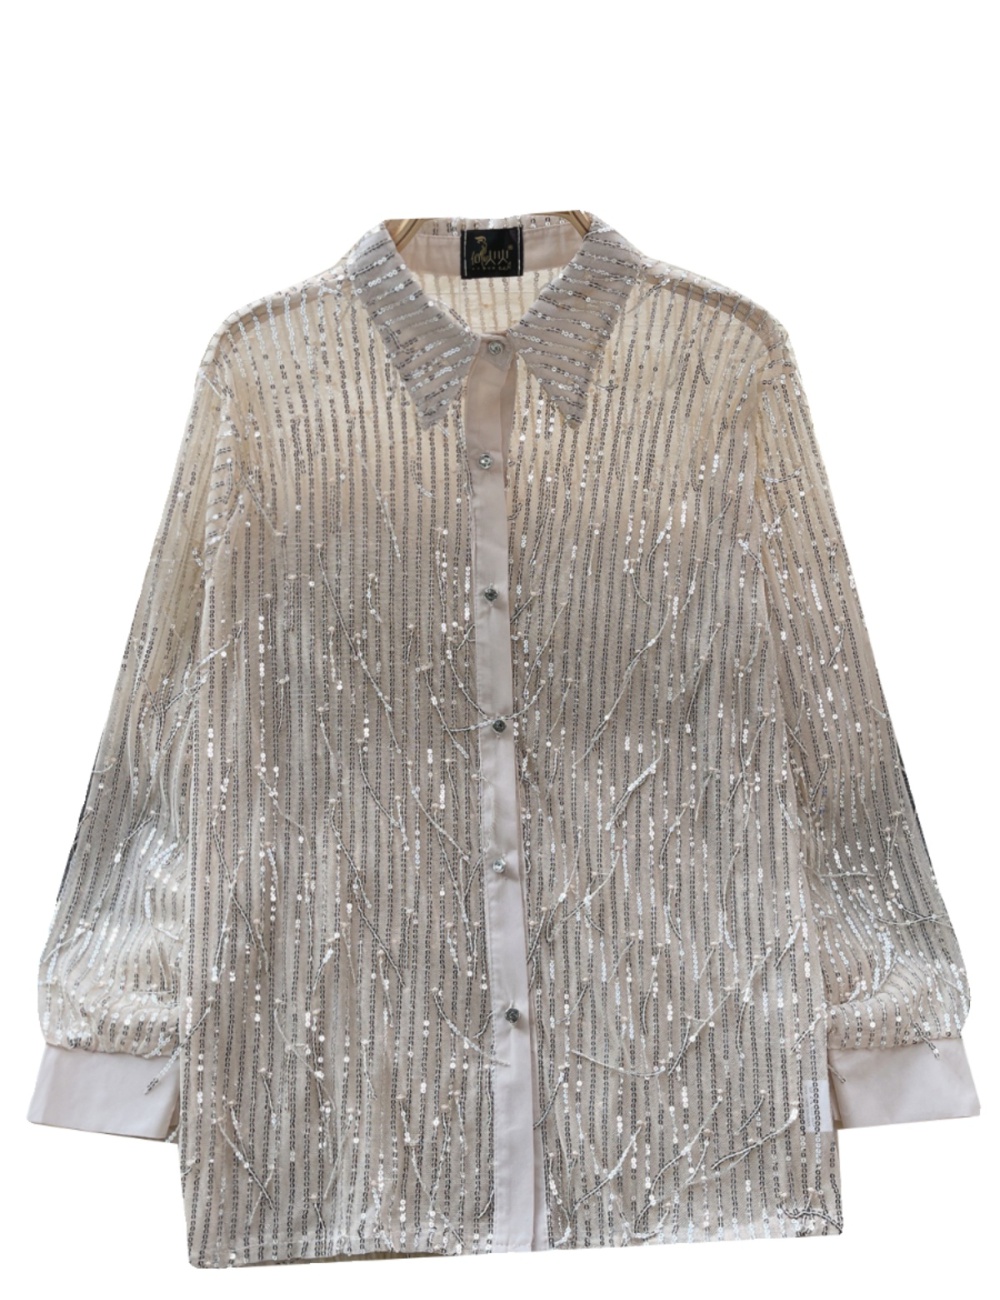 Sequins spring shirt long sleeve perspective tops